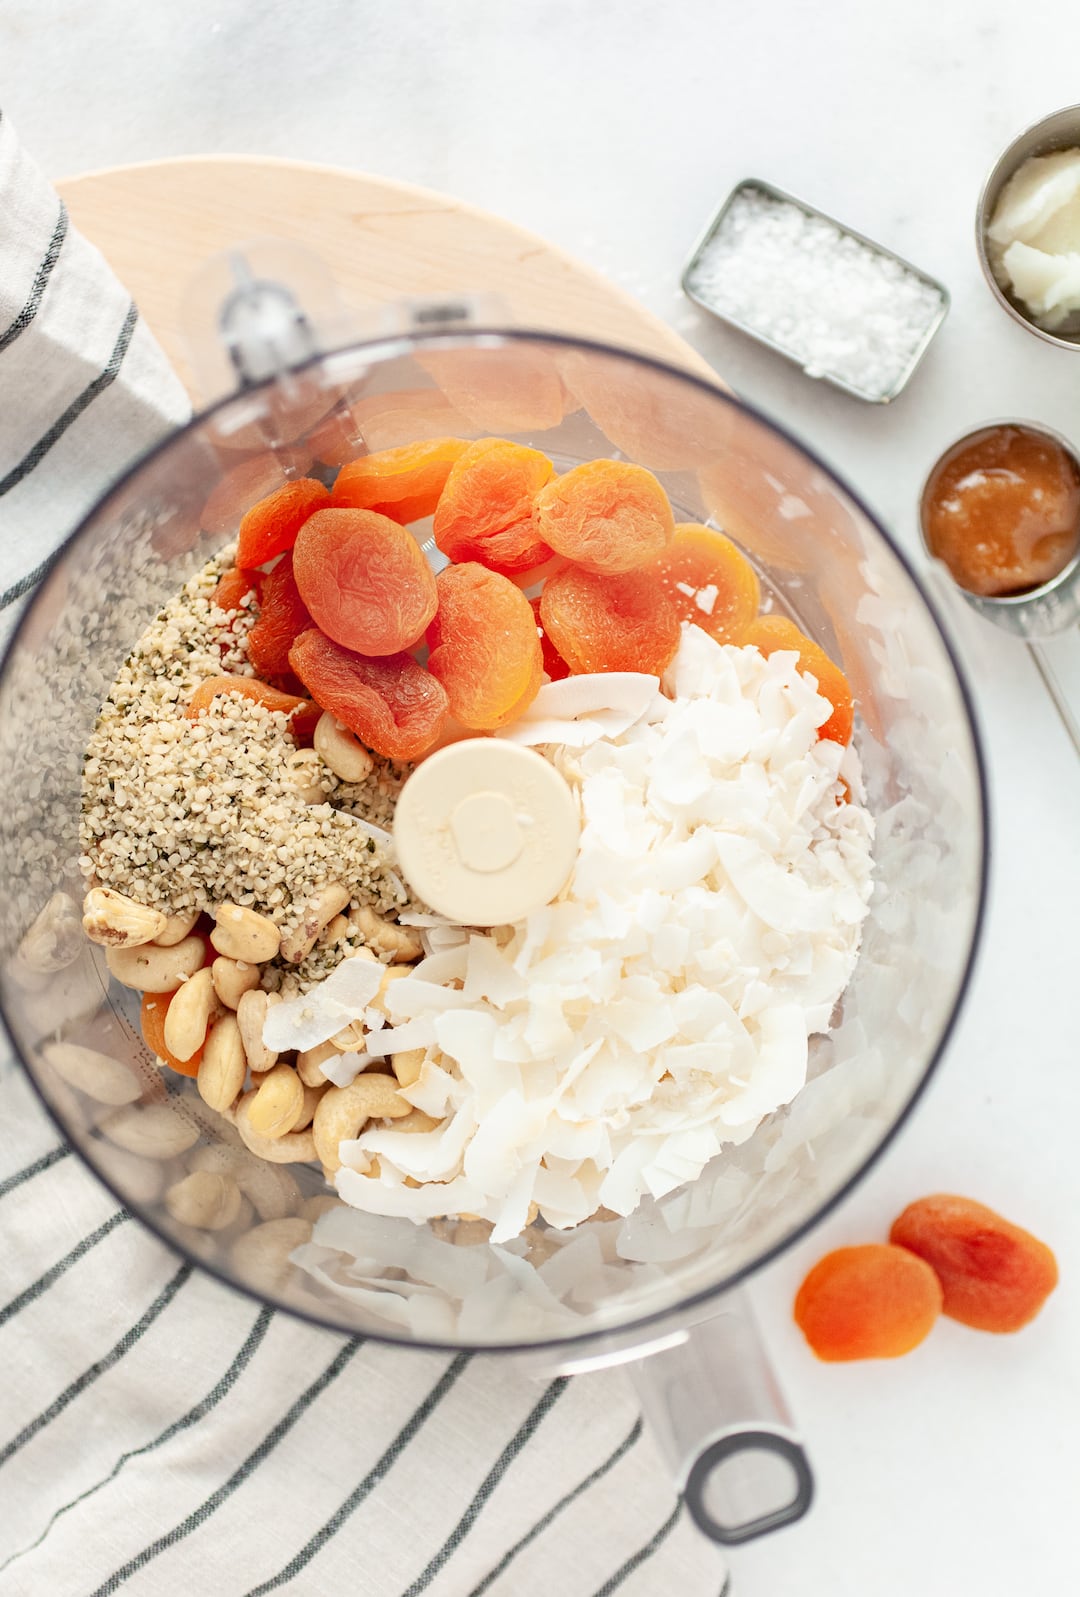 Ingredients for Apricot Cashew Energy Bars in a food processor